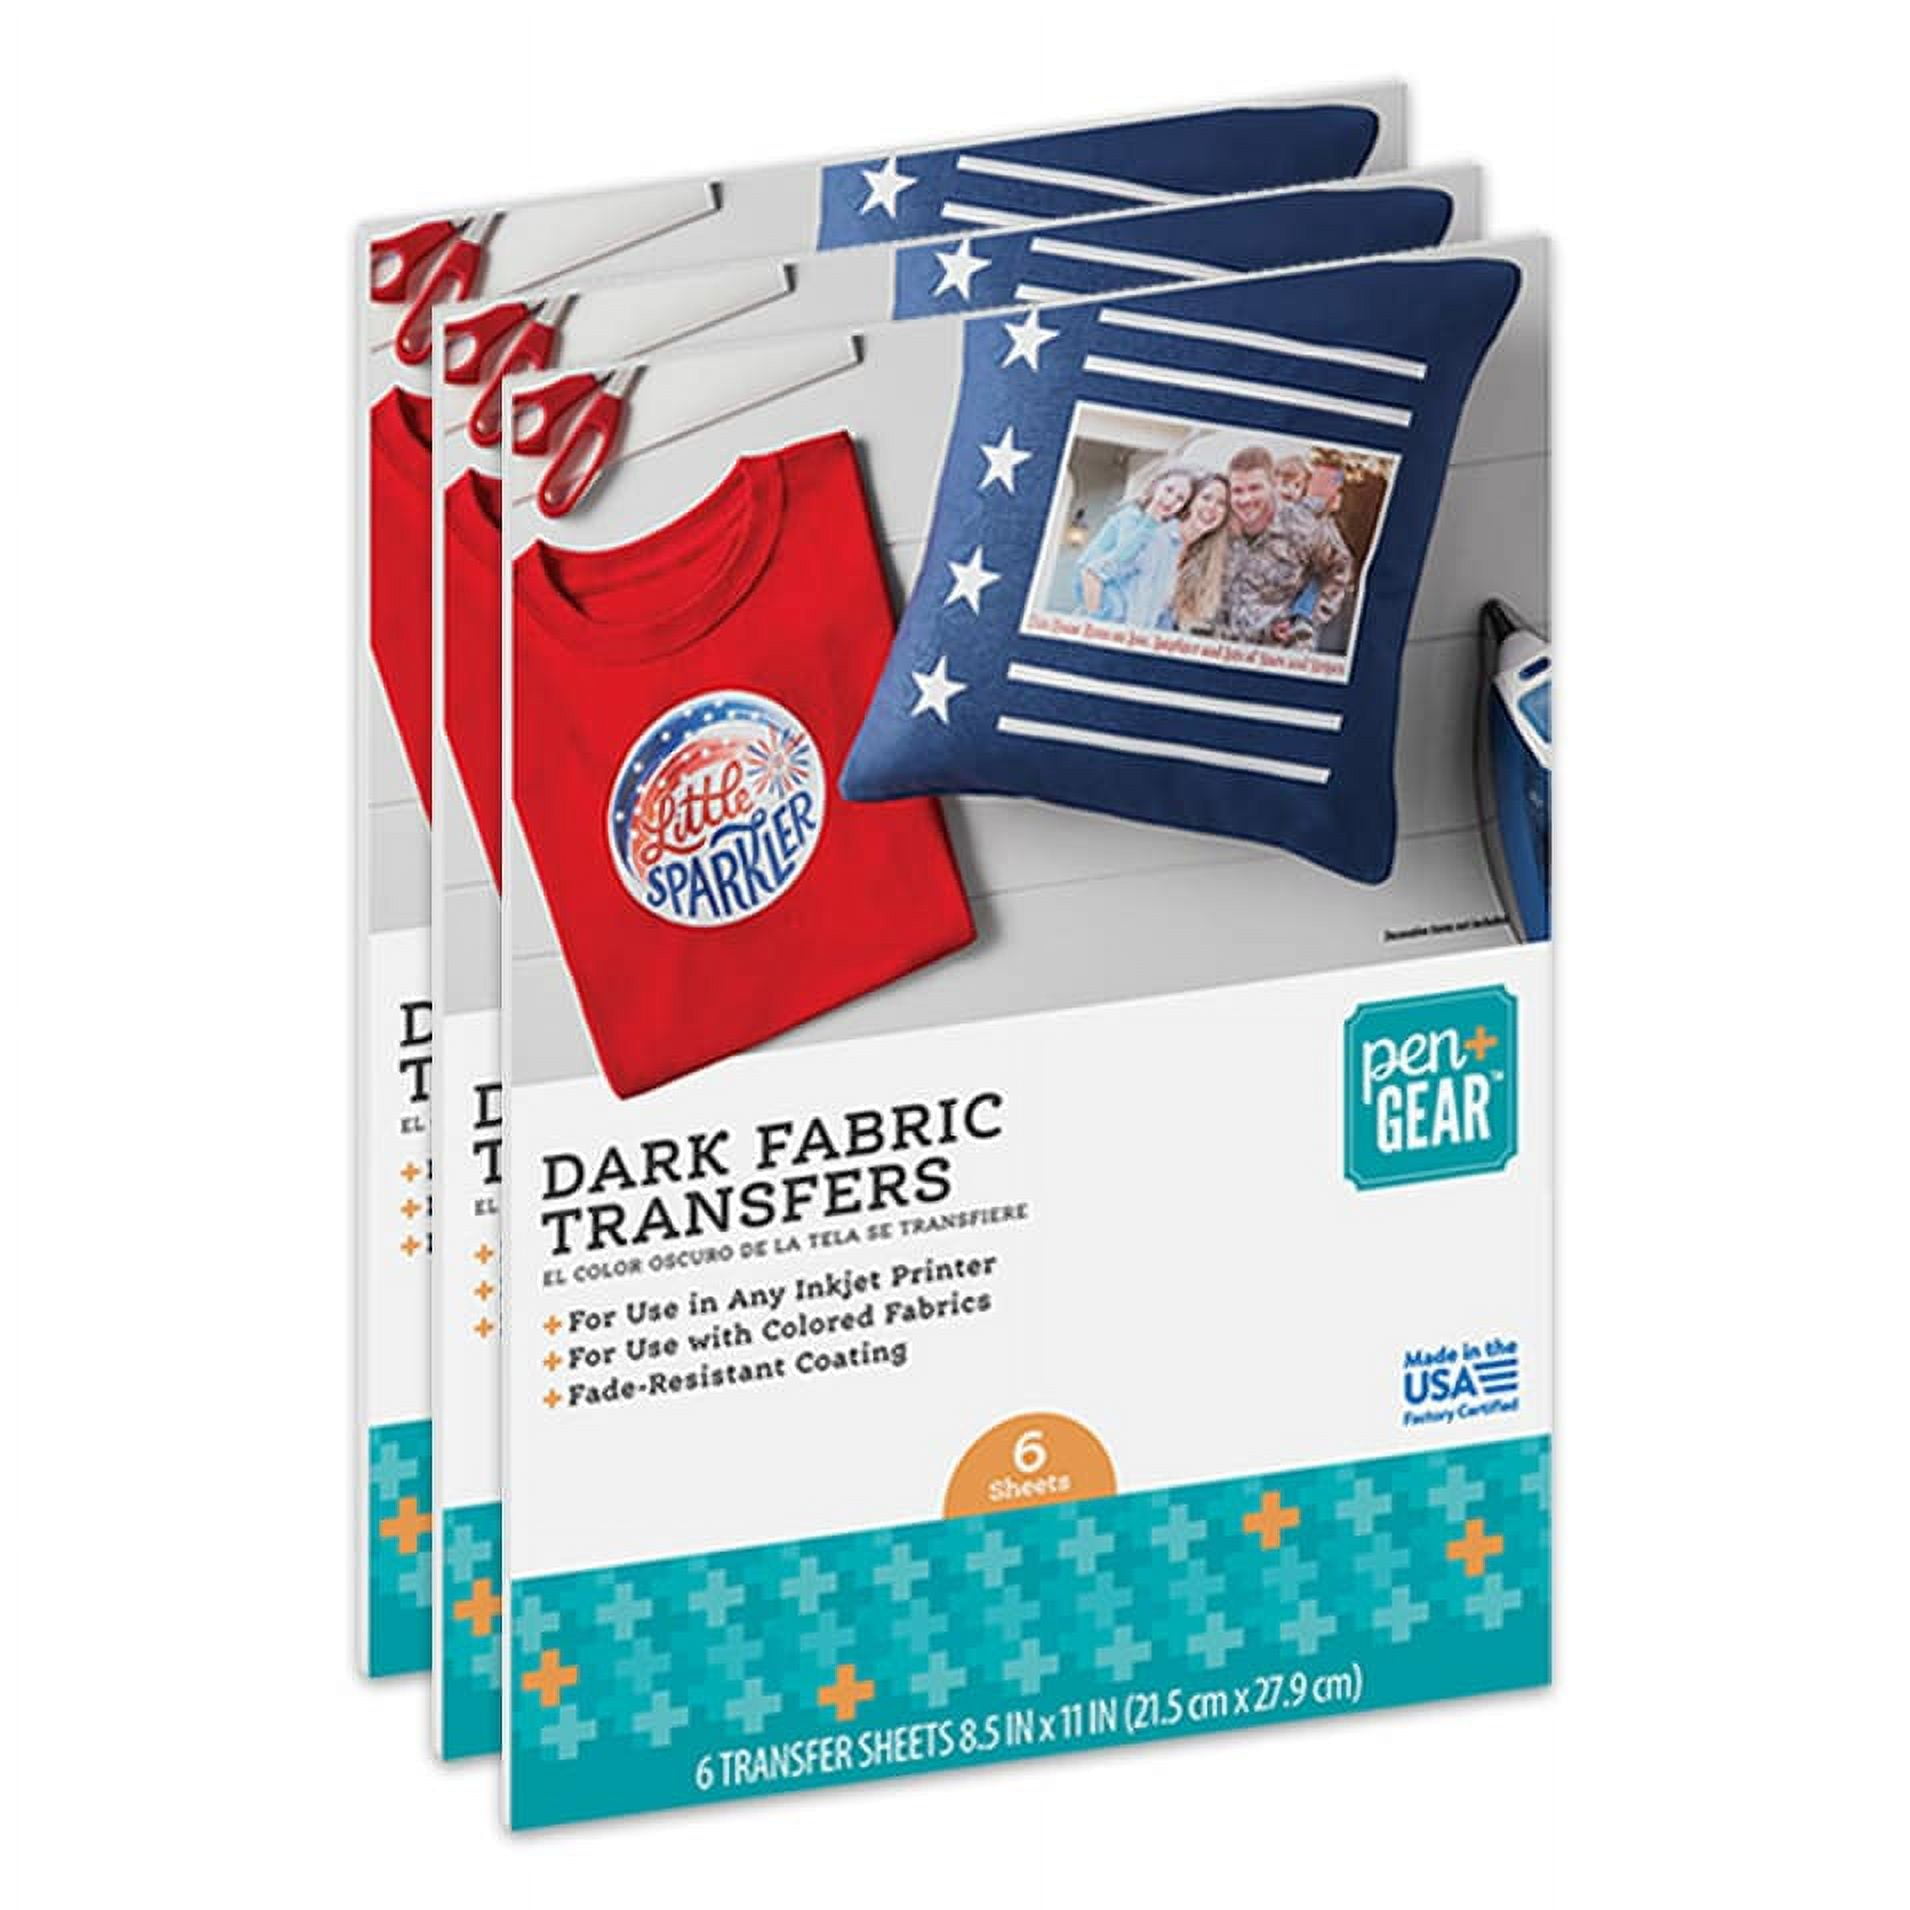 Pen + Gear Dark Fabric Transfer Paper for Colored Fabrics, Inkjet Printable, 8.5 x 11 inch, 18 Sheets, 55312-3